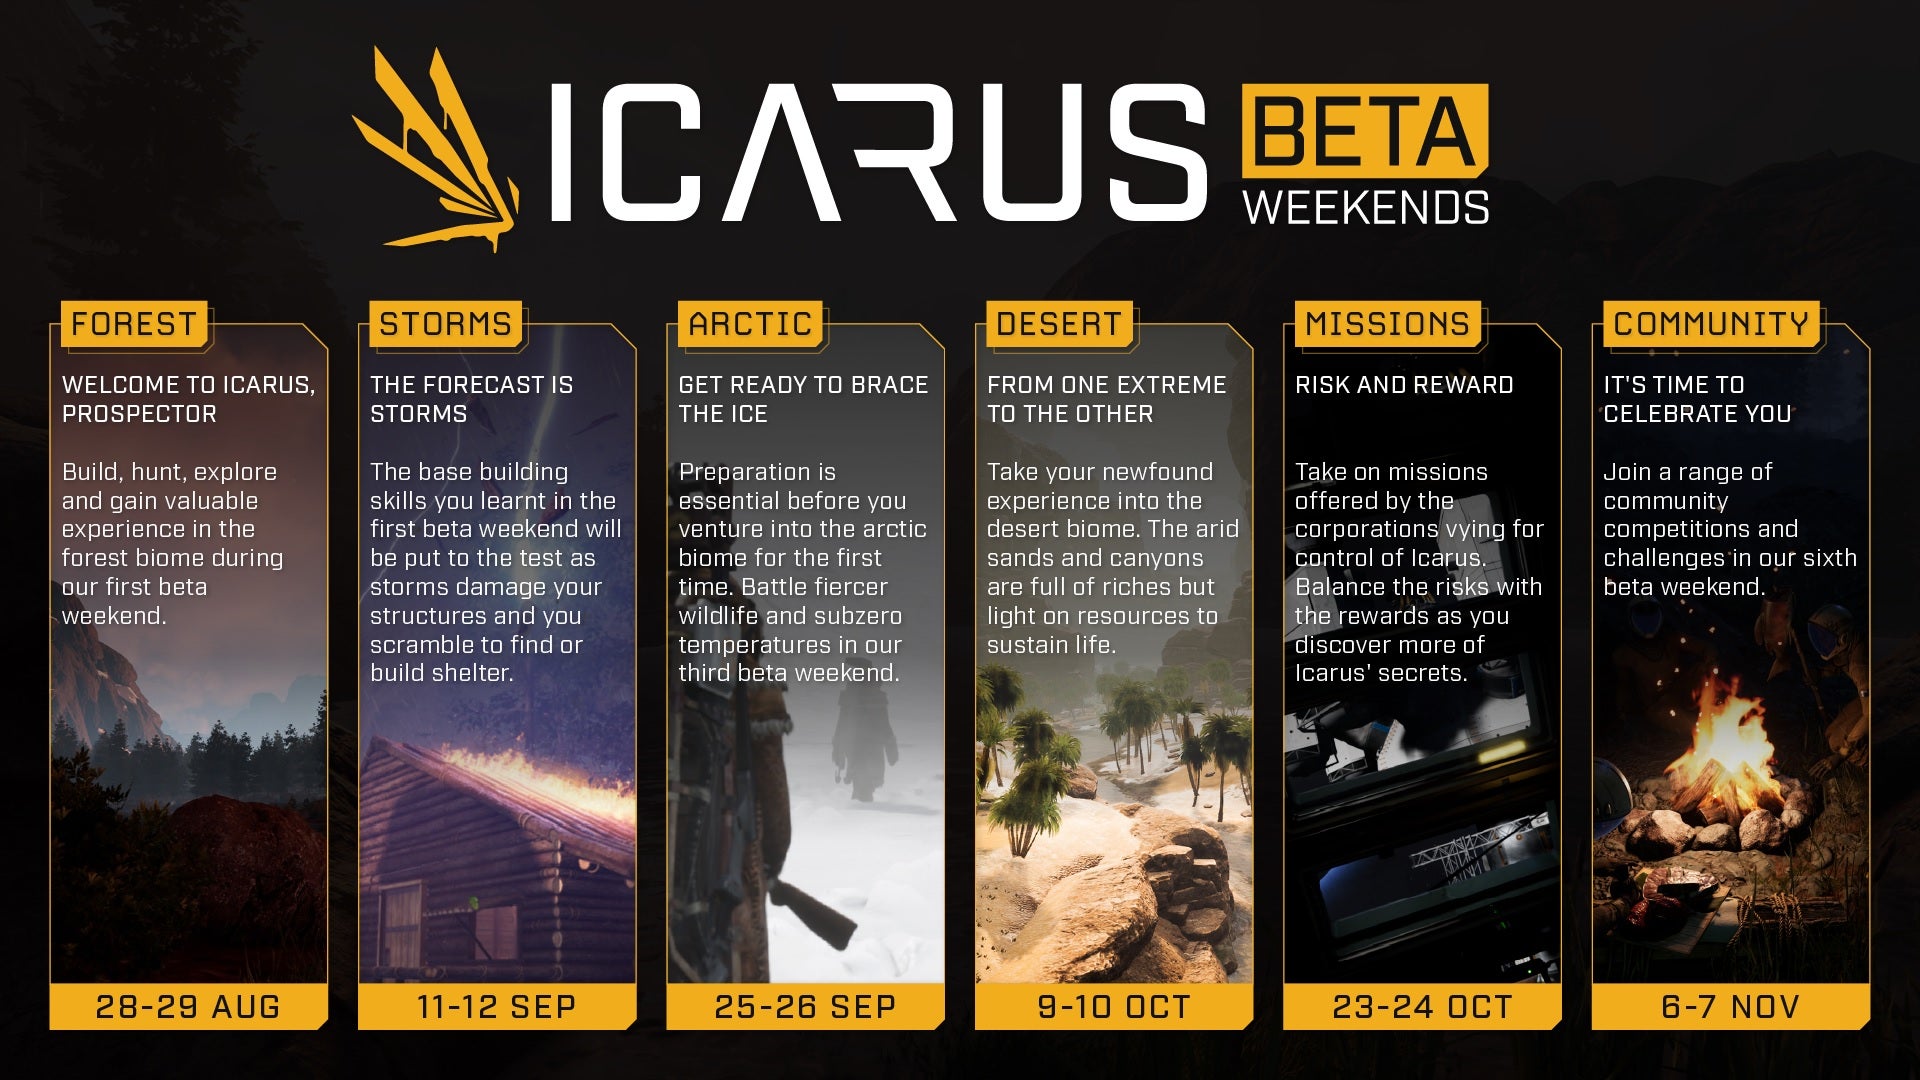 Icarus beta weekends schedule: "Forest" on August 28/29, "Storms" on September 11/12, "Arctic" on September 25/26, "Desert" on October 9/10, "Missions" on October 23/24, and "Community" on November 6/7.